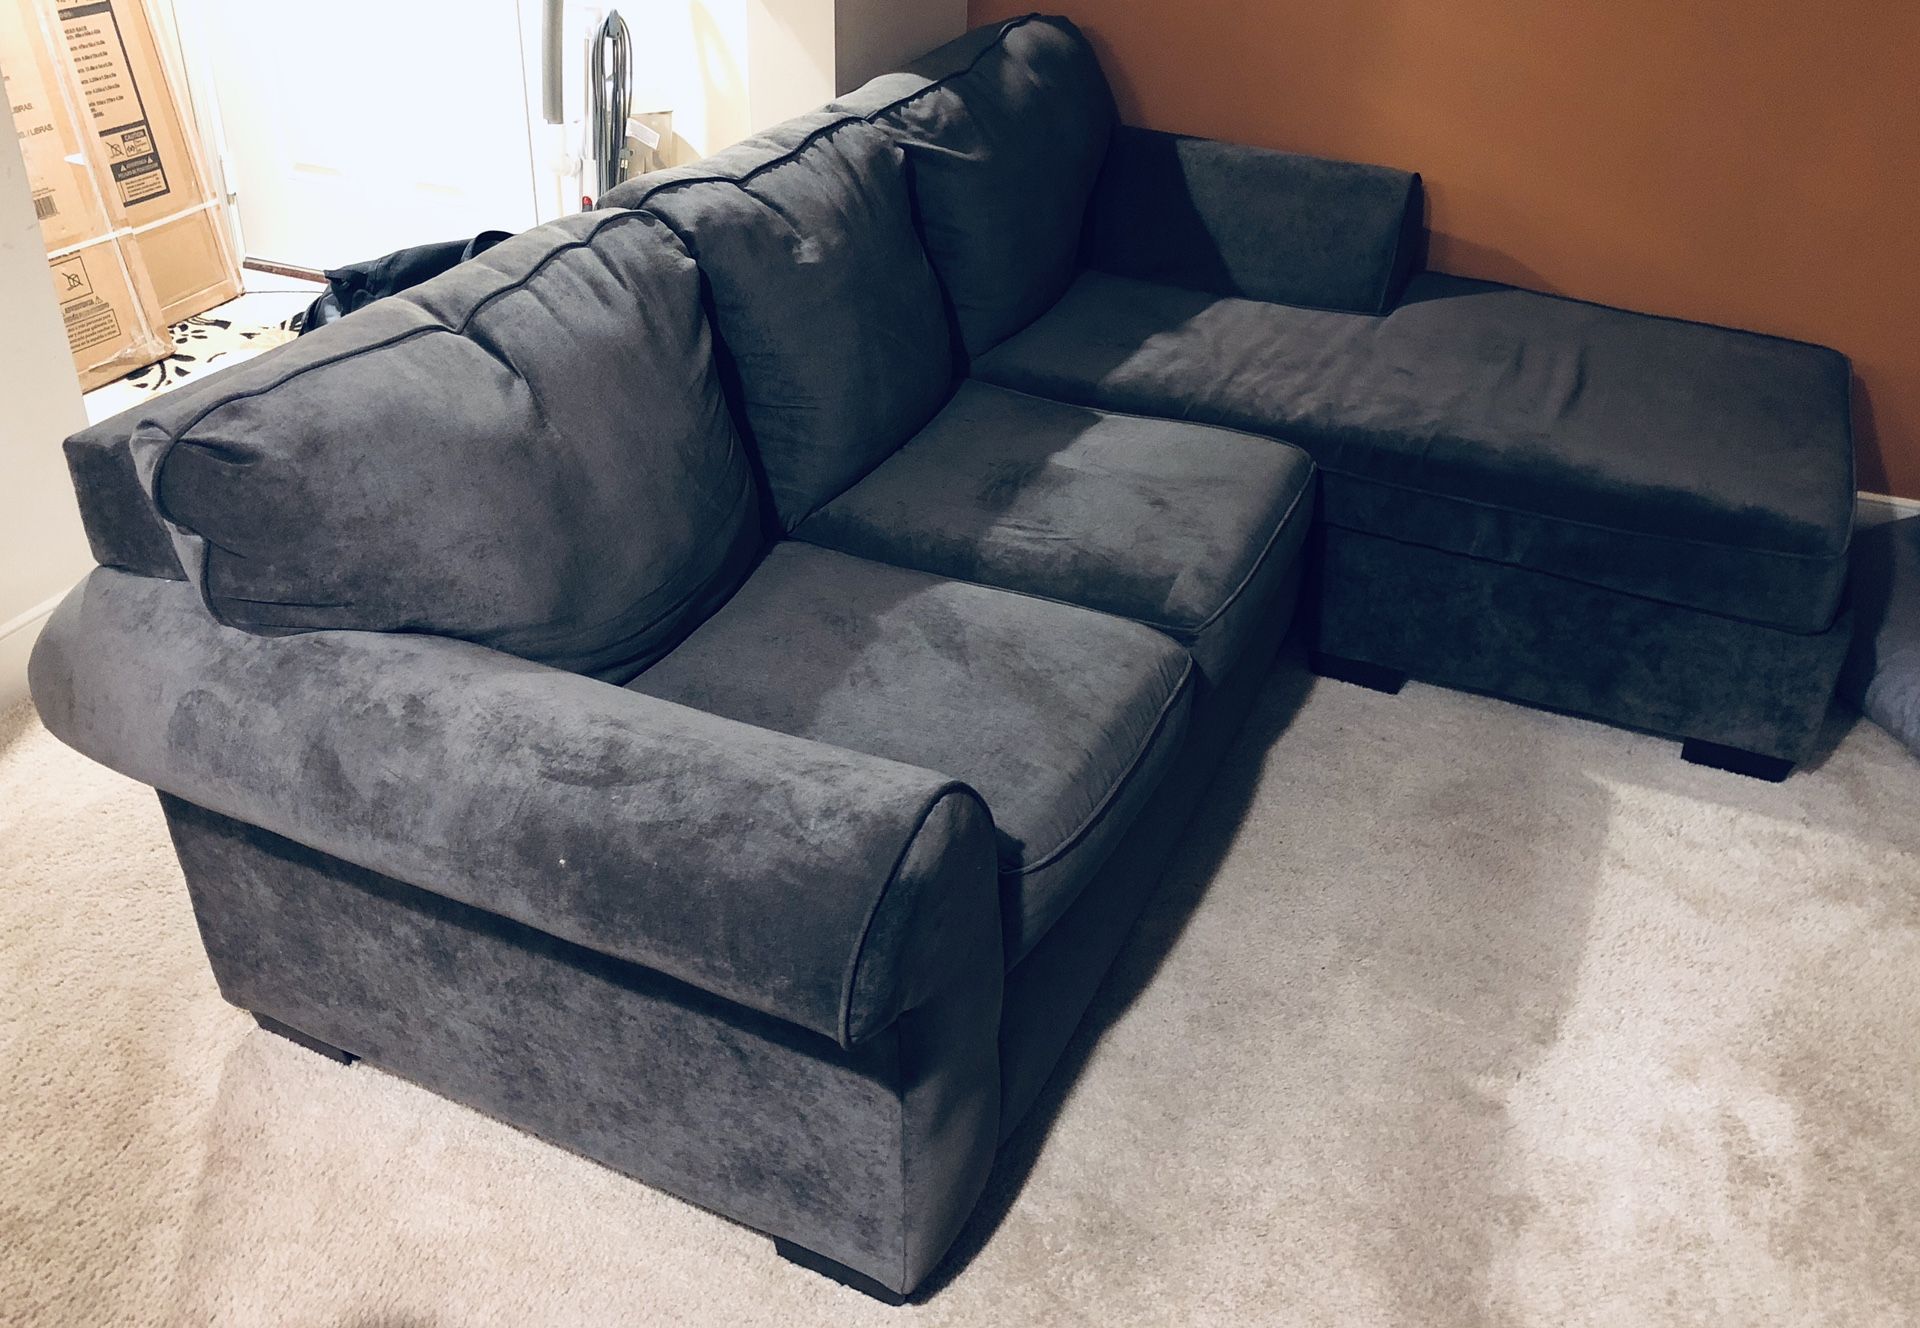 Worcester Sofa Chaise - $200